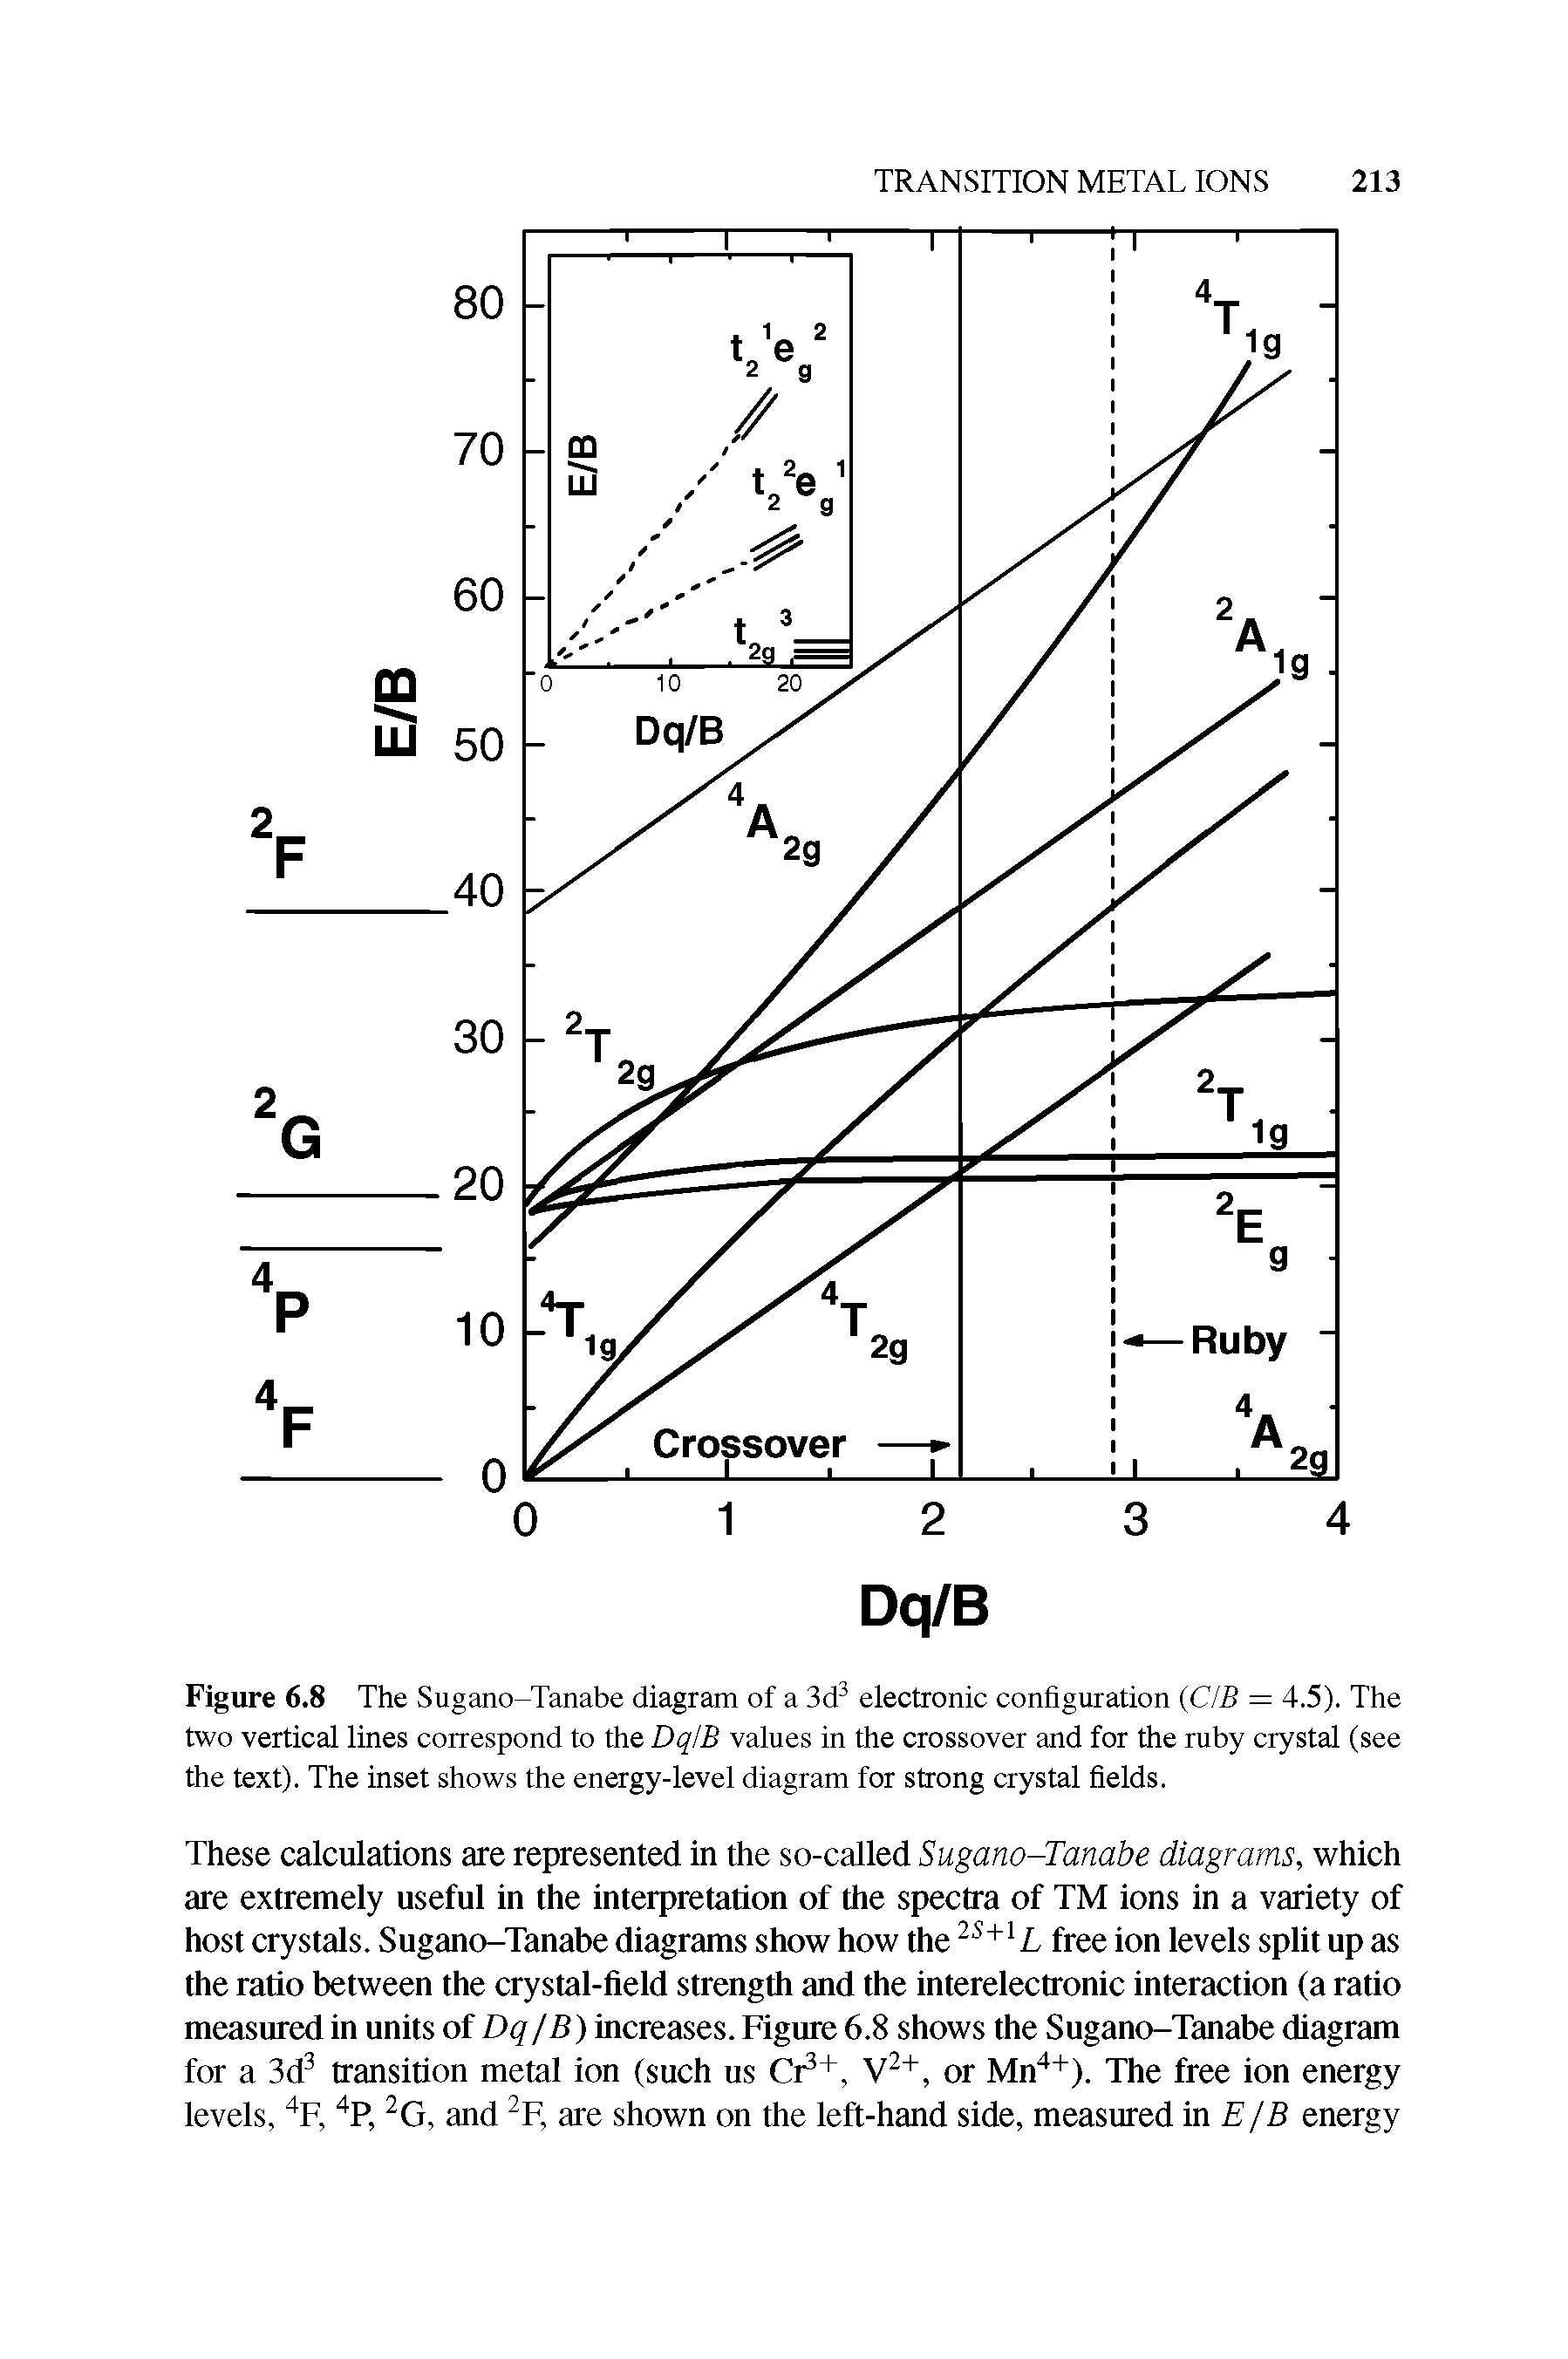 Figure 6.8 The Sugano-Tanabe diagram of a 3d electronic configuration (C/5 = 4.5). The two vertical lines correspond to the DqlB values in the crossover and for the ruby crystal (see the text). The inset shows the energy-level diagram for strong crystal fields.